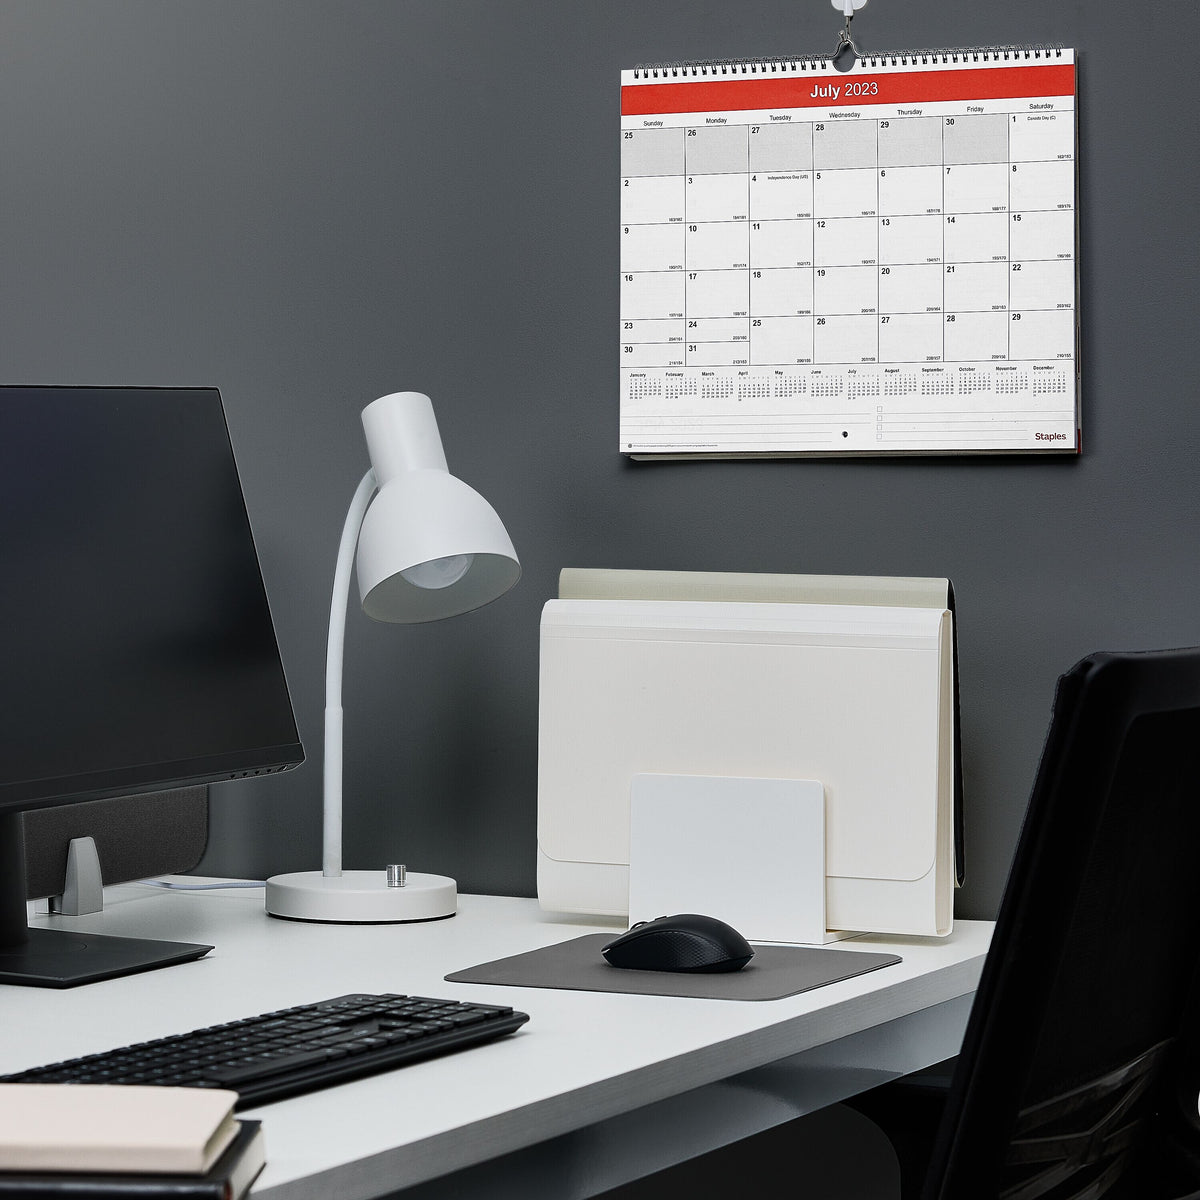 2023-2024 Staples 15" x 12" Academic Monthly Wall Calendar, Red/White